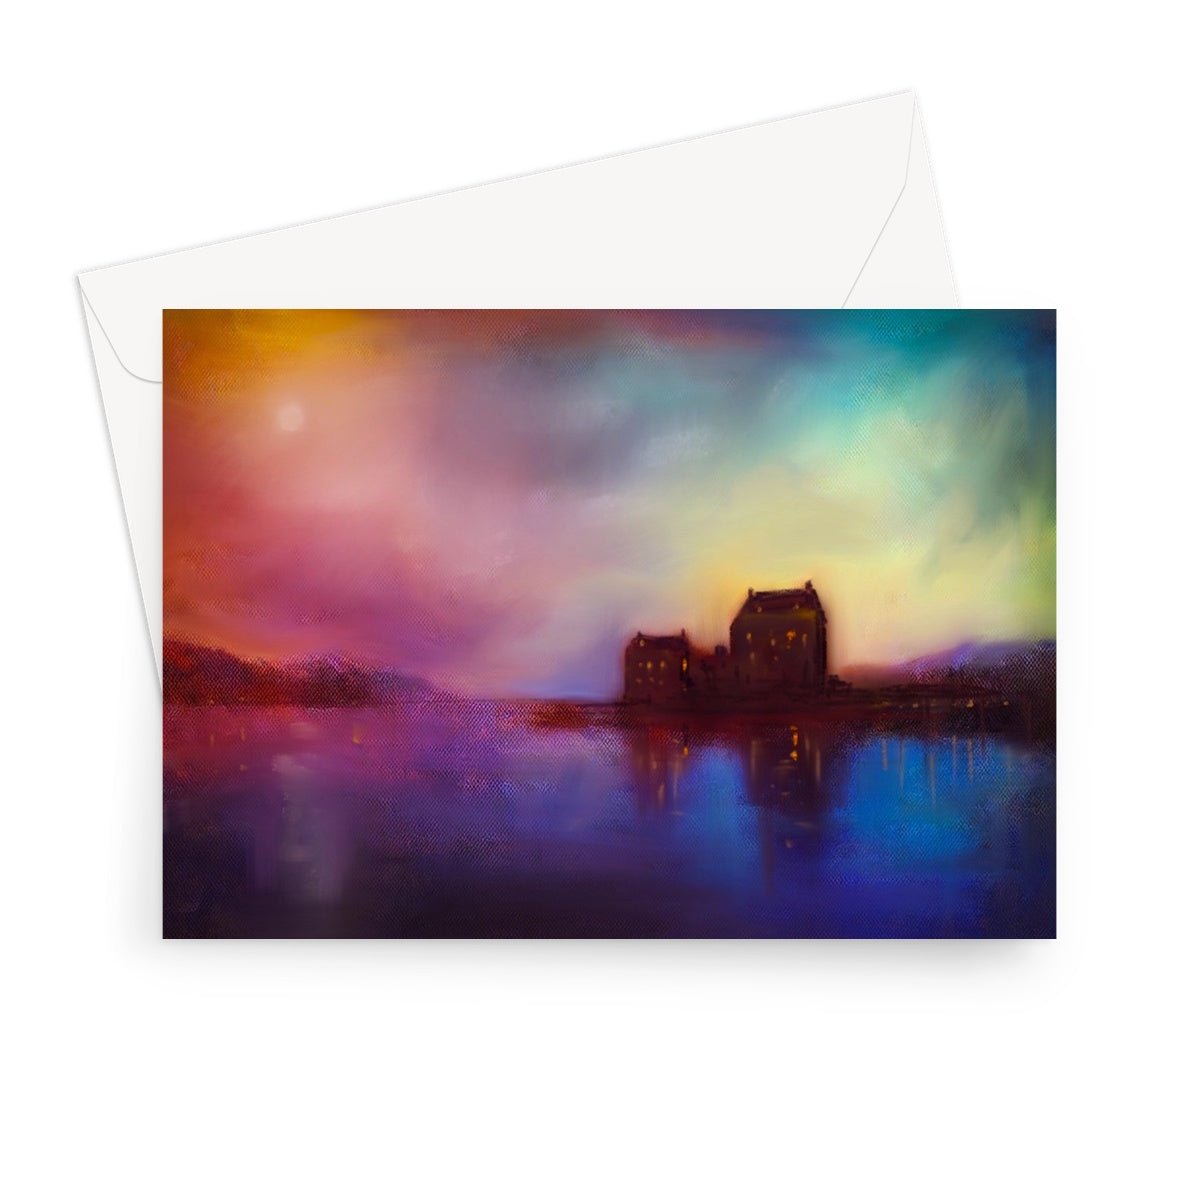 Eilean Donan Castle Sunset Art Gifts Greeting Card-Greetings Cards-Scottish Castles Art Gallery-7"x5"-1 Card-Paintings, Prints, Homeware, Art Gifts From Scotland By Scottish Artist Kevin Hunter